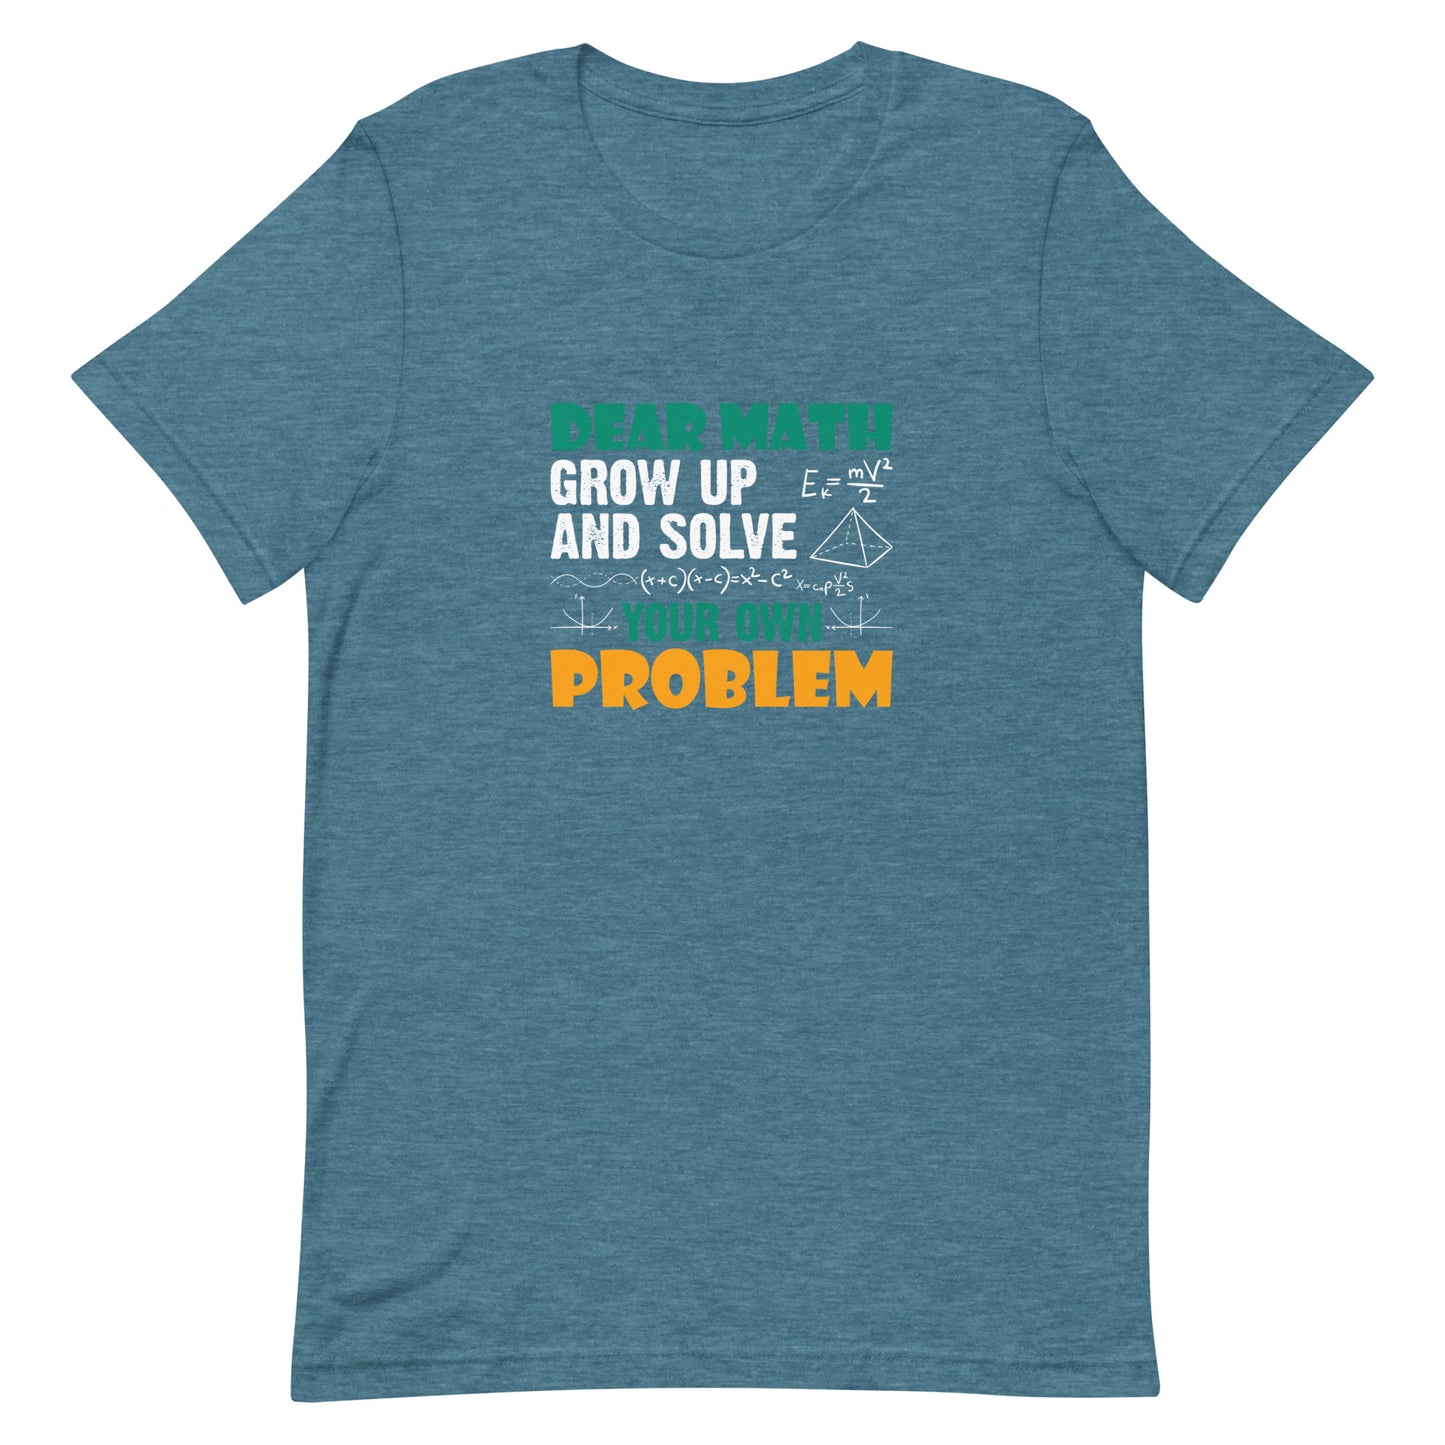 Dear Math Grow Up and Solve Your Own Problem Unisex T-shirt